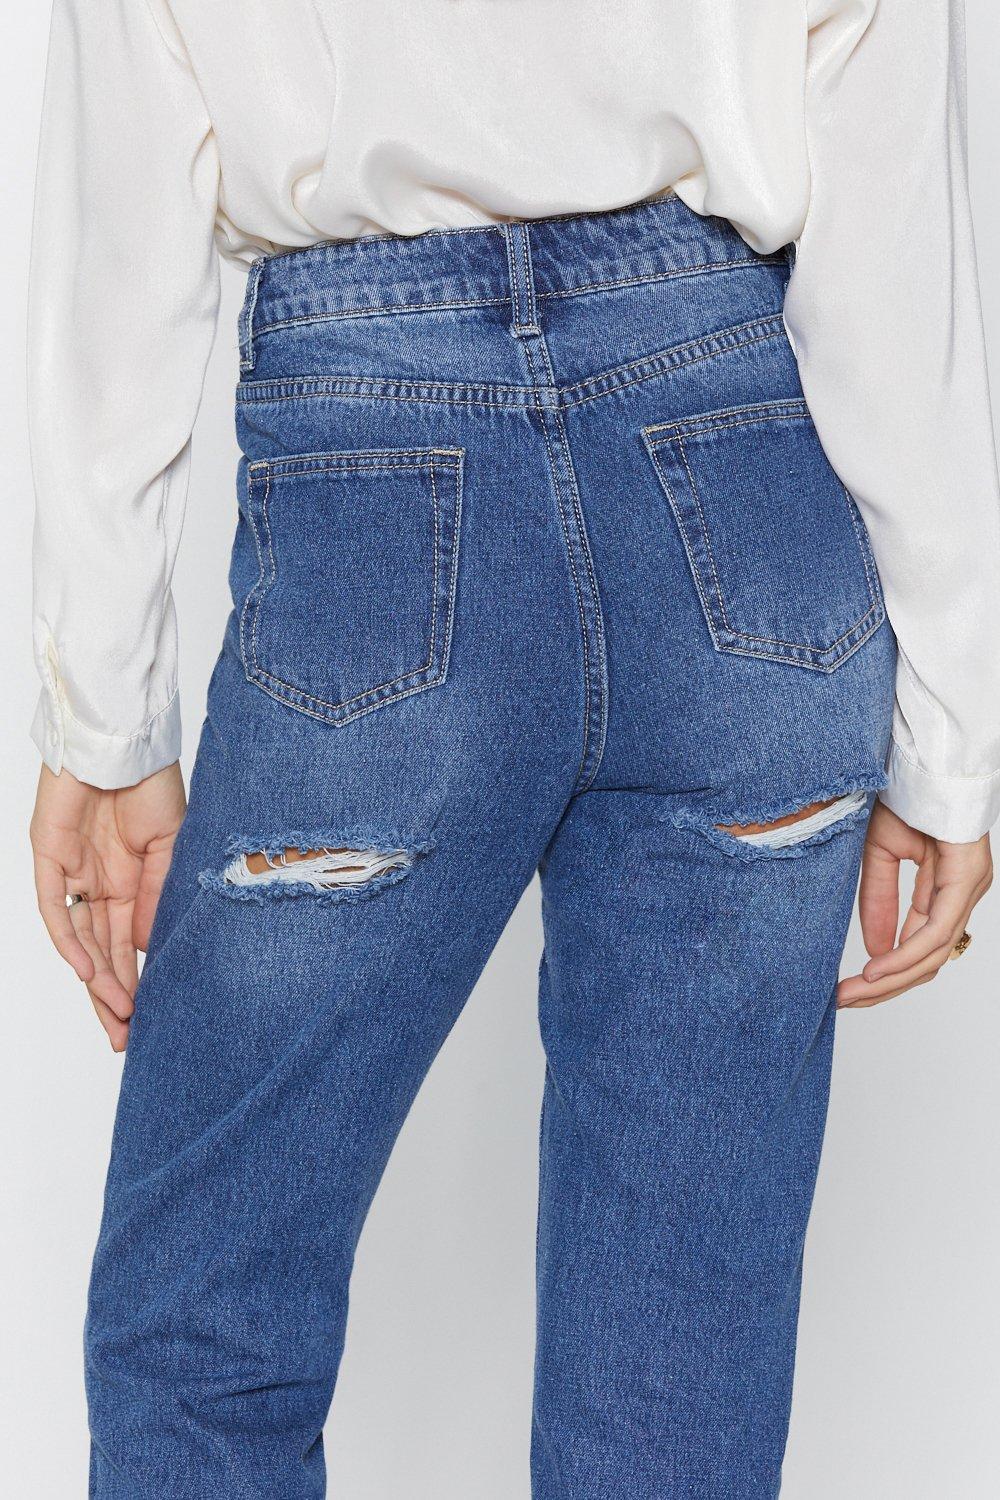 mom jeans ripped bum